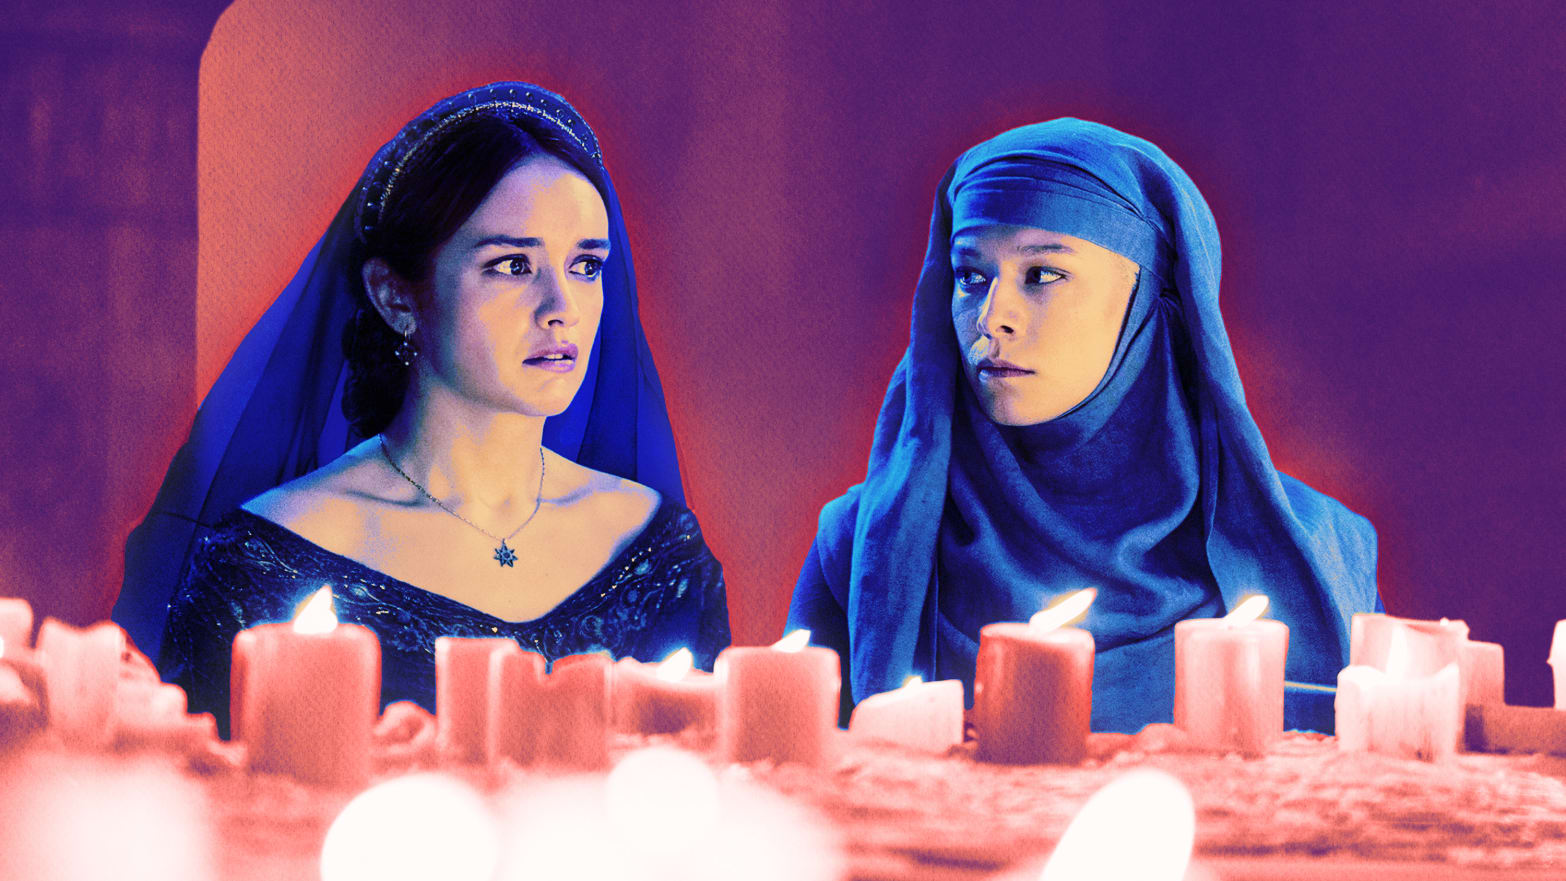 An illustration of Olivia Cooke and Emma D’Arcy